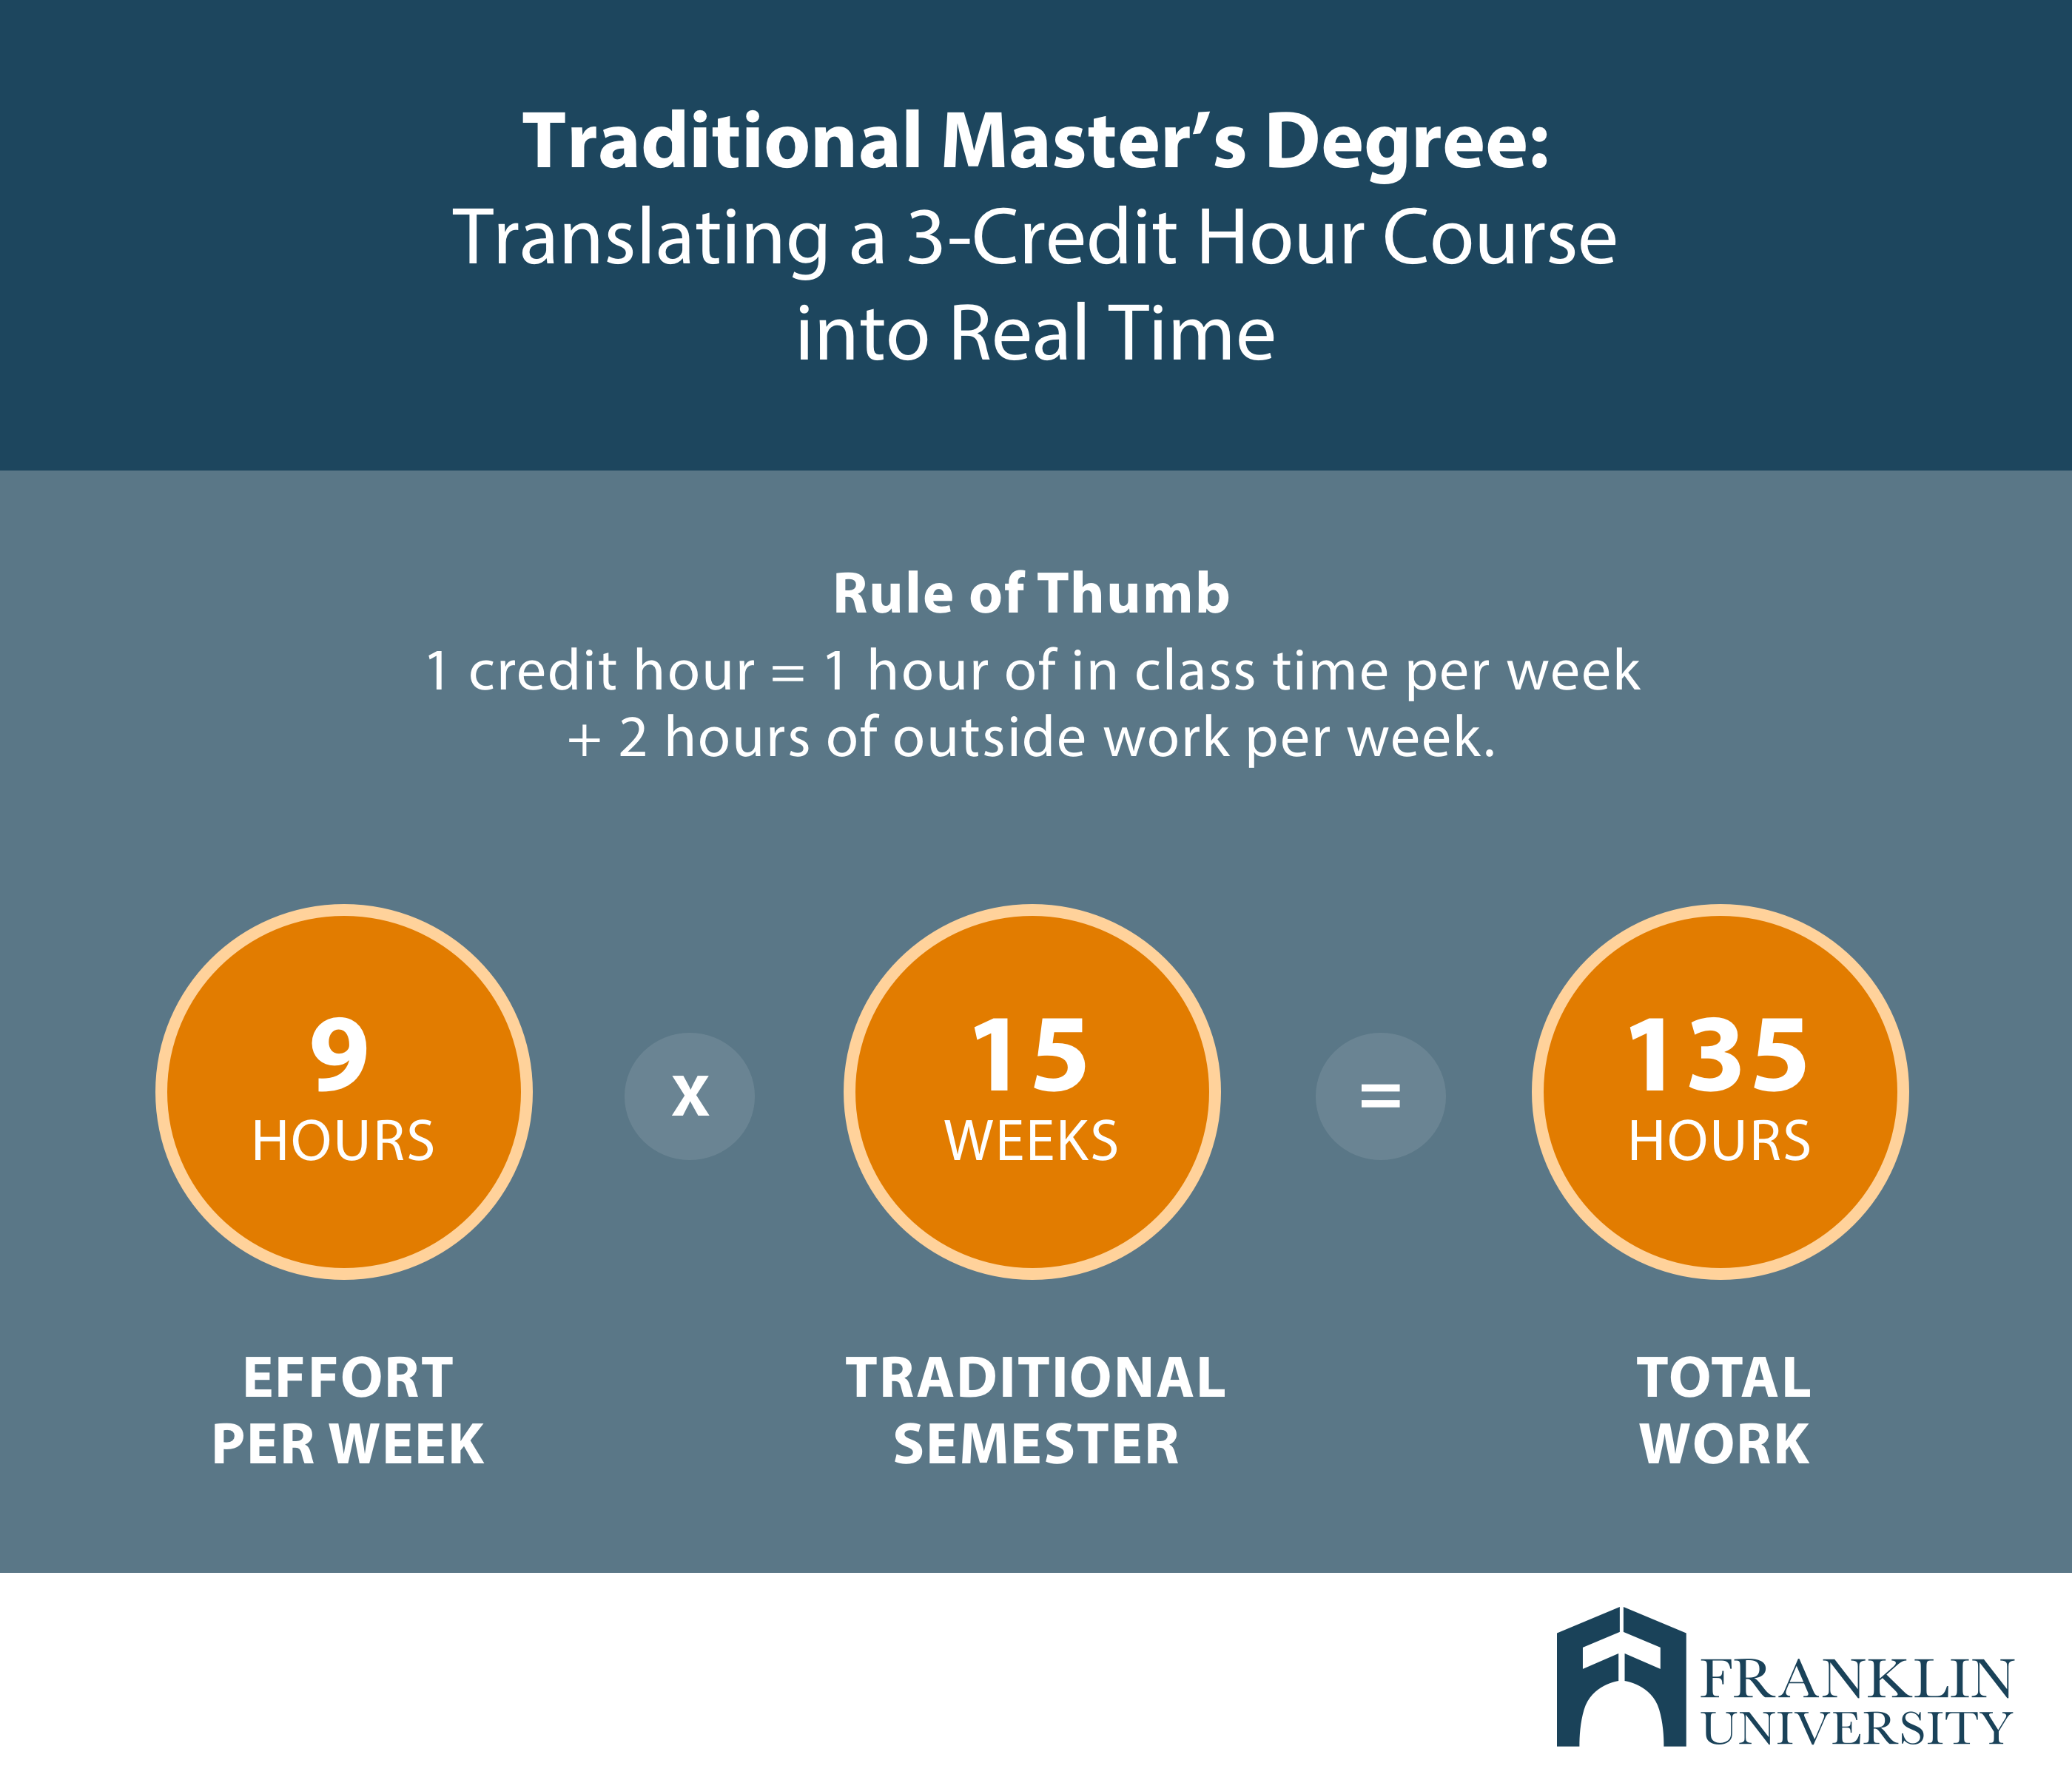 how long is a masters degree dissertation